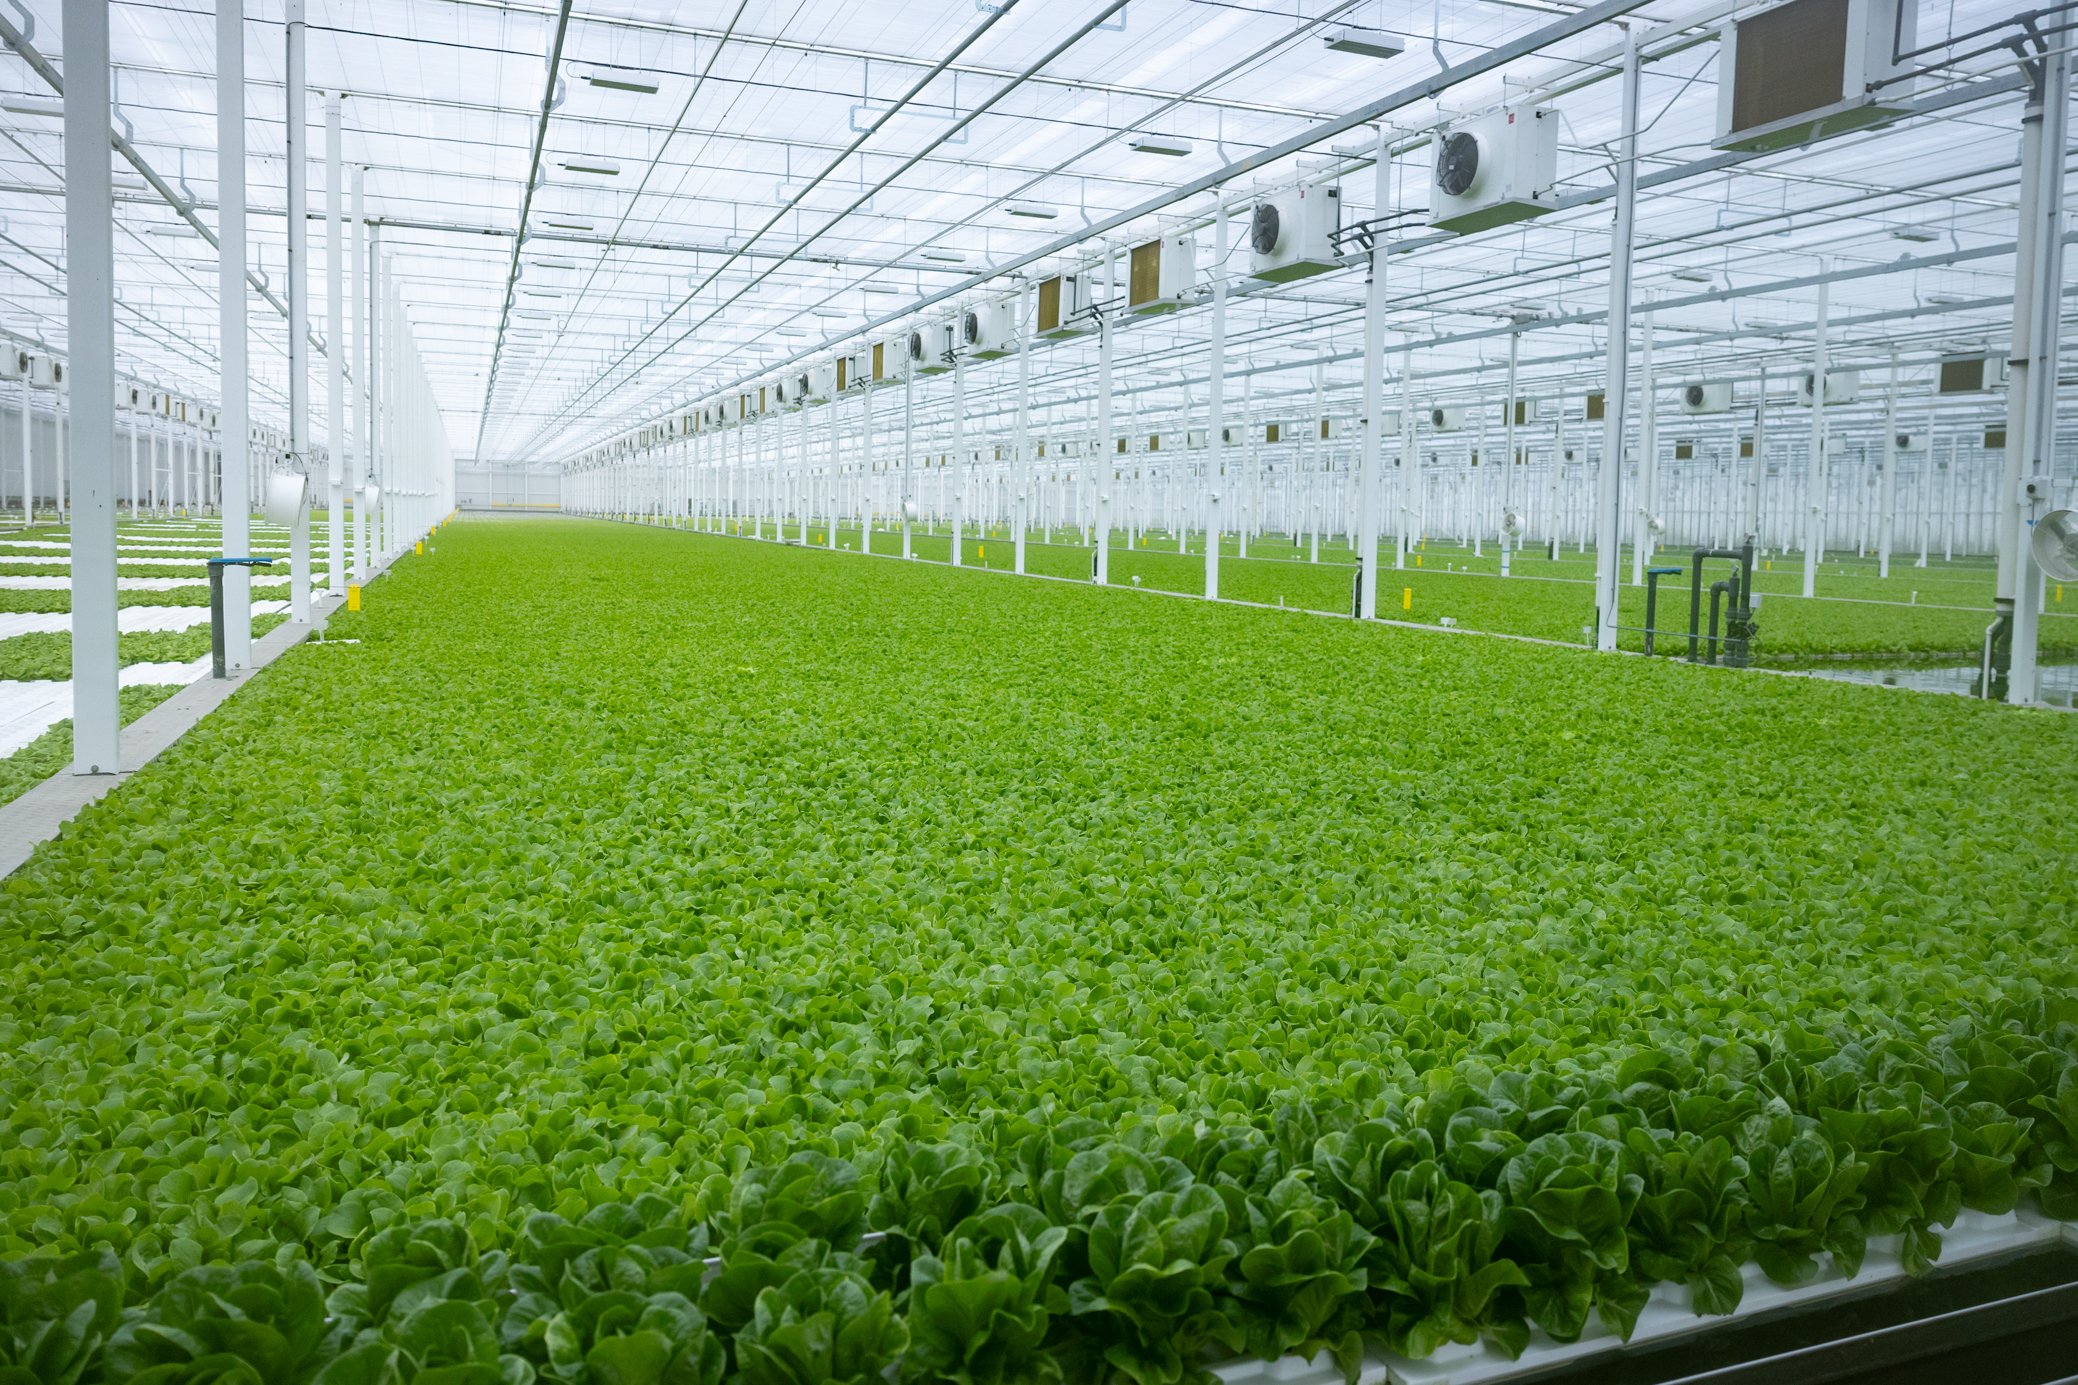 The inside of a large, warehouse-sized greenhouse is seen. Large grows of green lettuce stretches from the foreground of the image far into the back, contrasting with the white ceiling and poles that line the rows.